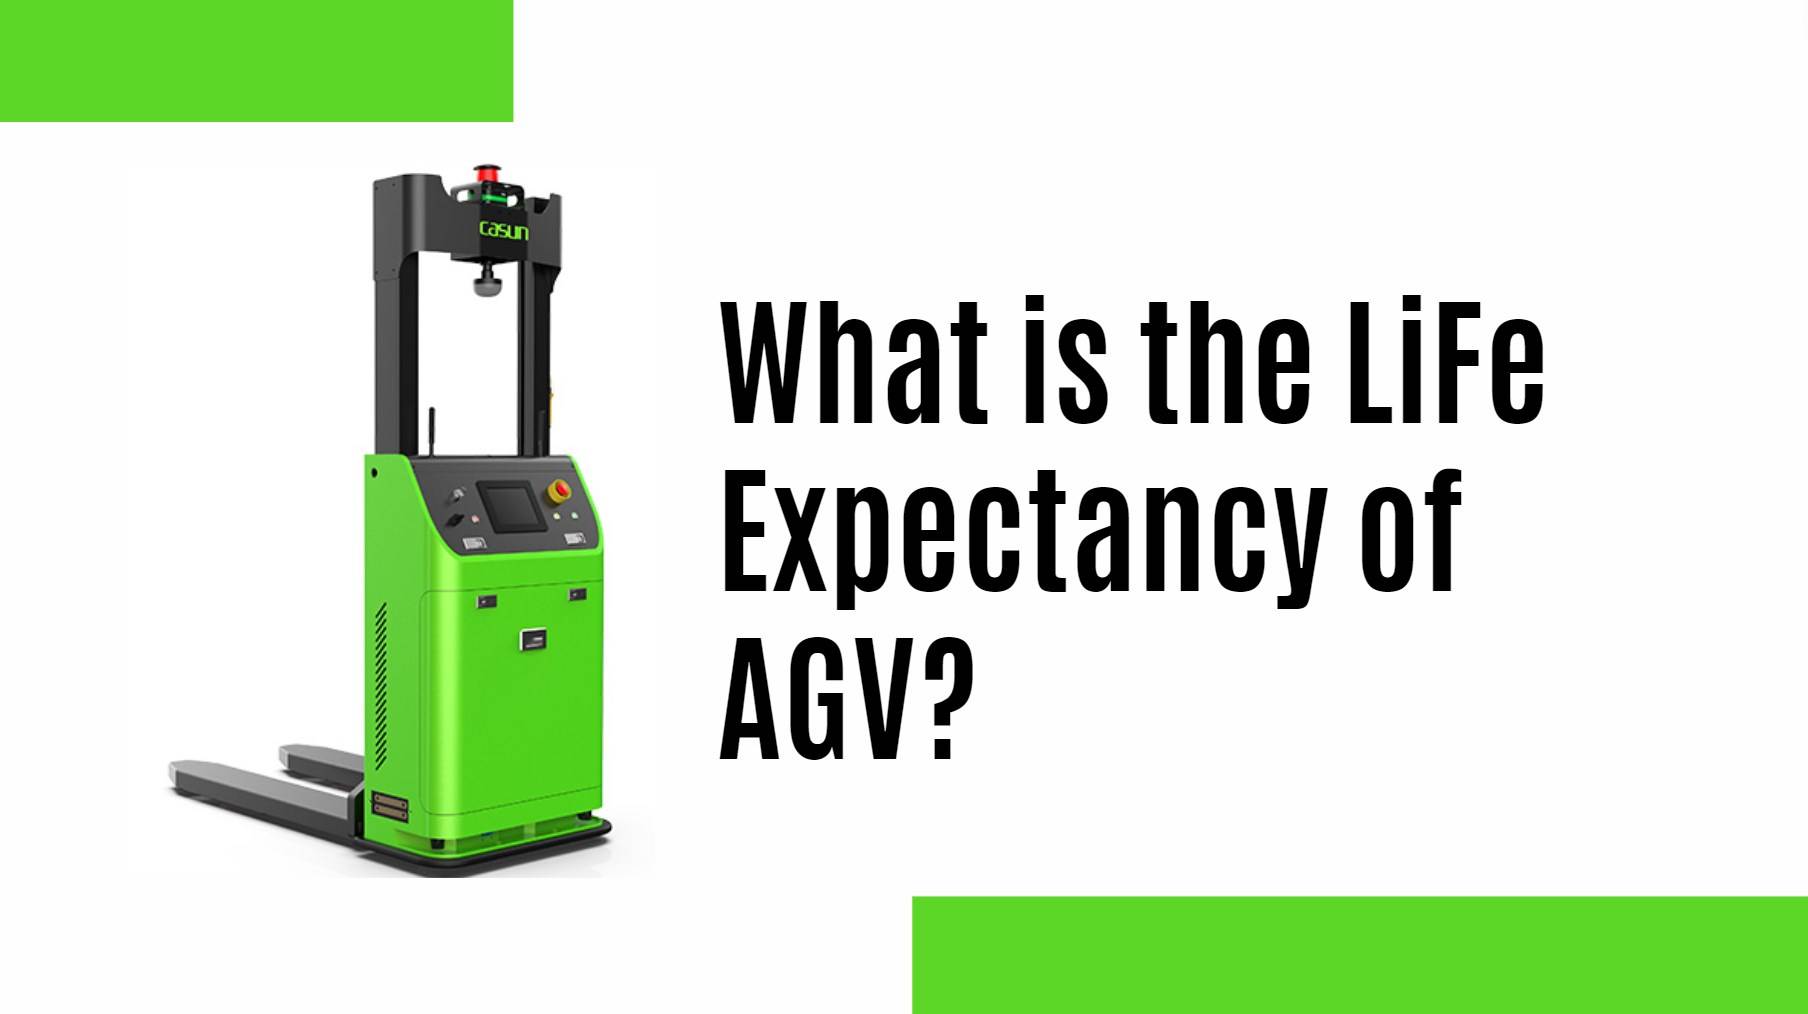 agv lithium battery manufacturer factory redway. What is the LiFe Expectancy of AGV?